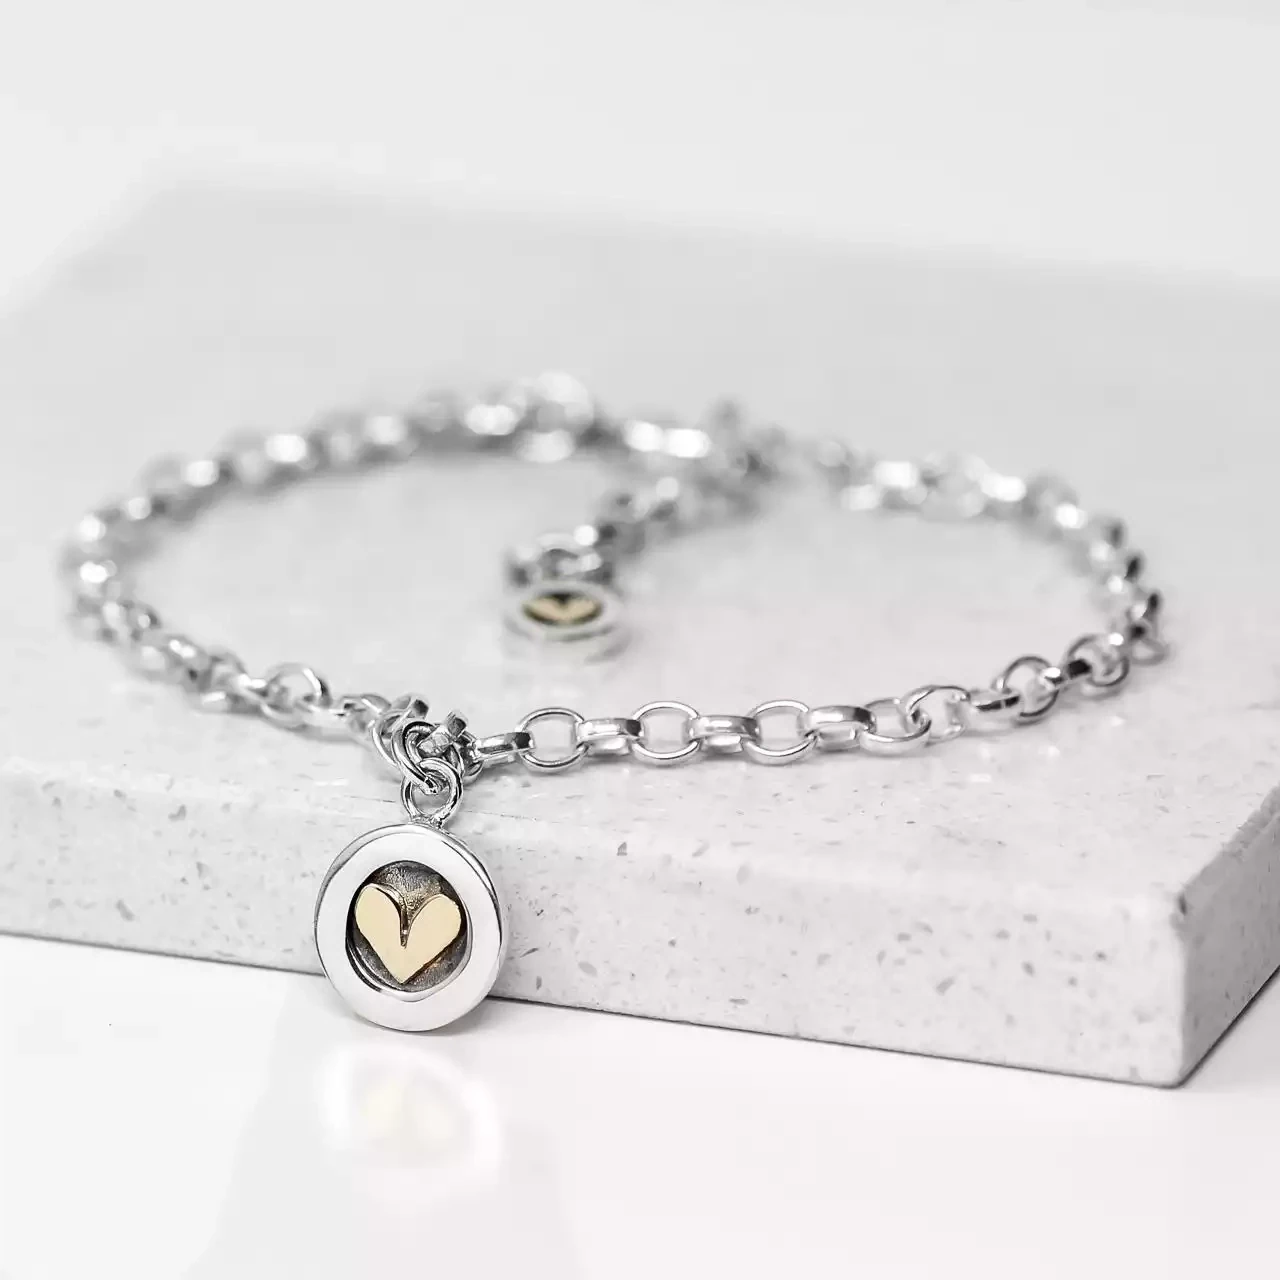 Heart of Gold Silver and Gold Charm Bracelet by Linda Macdonald